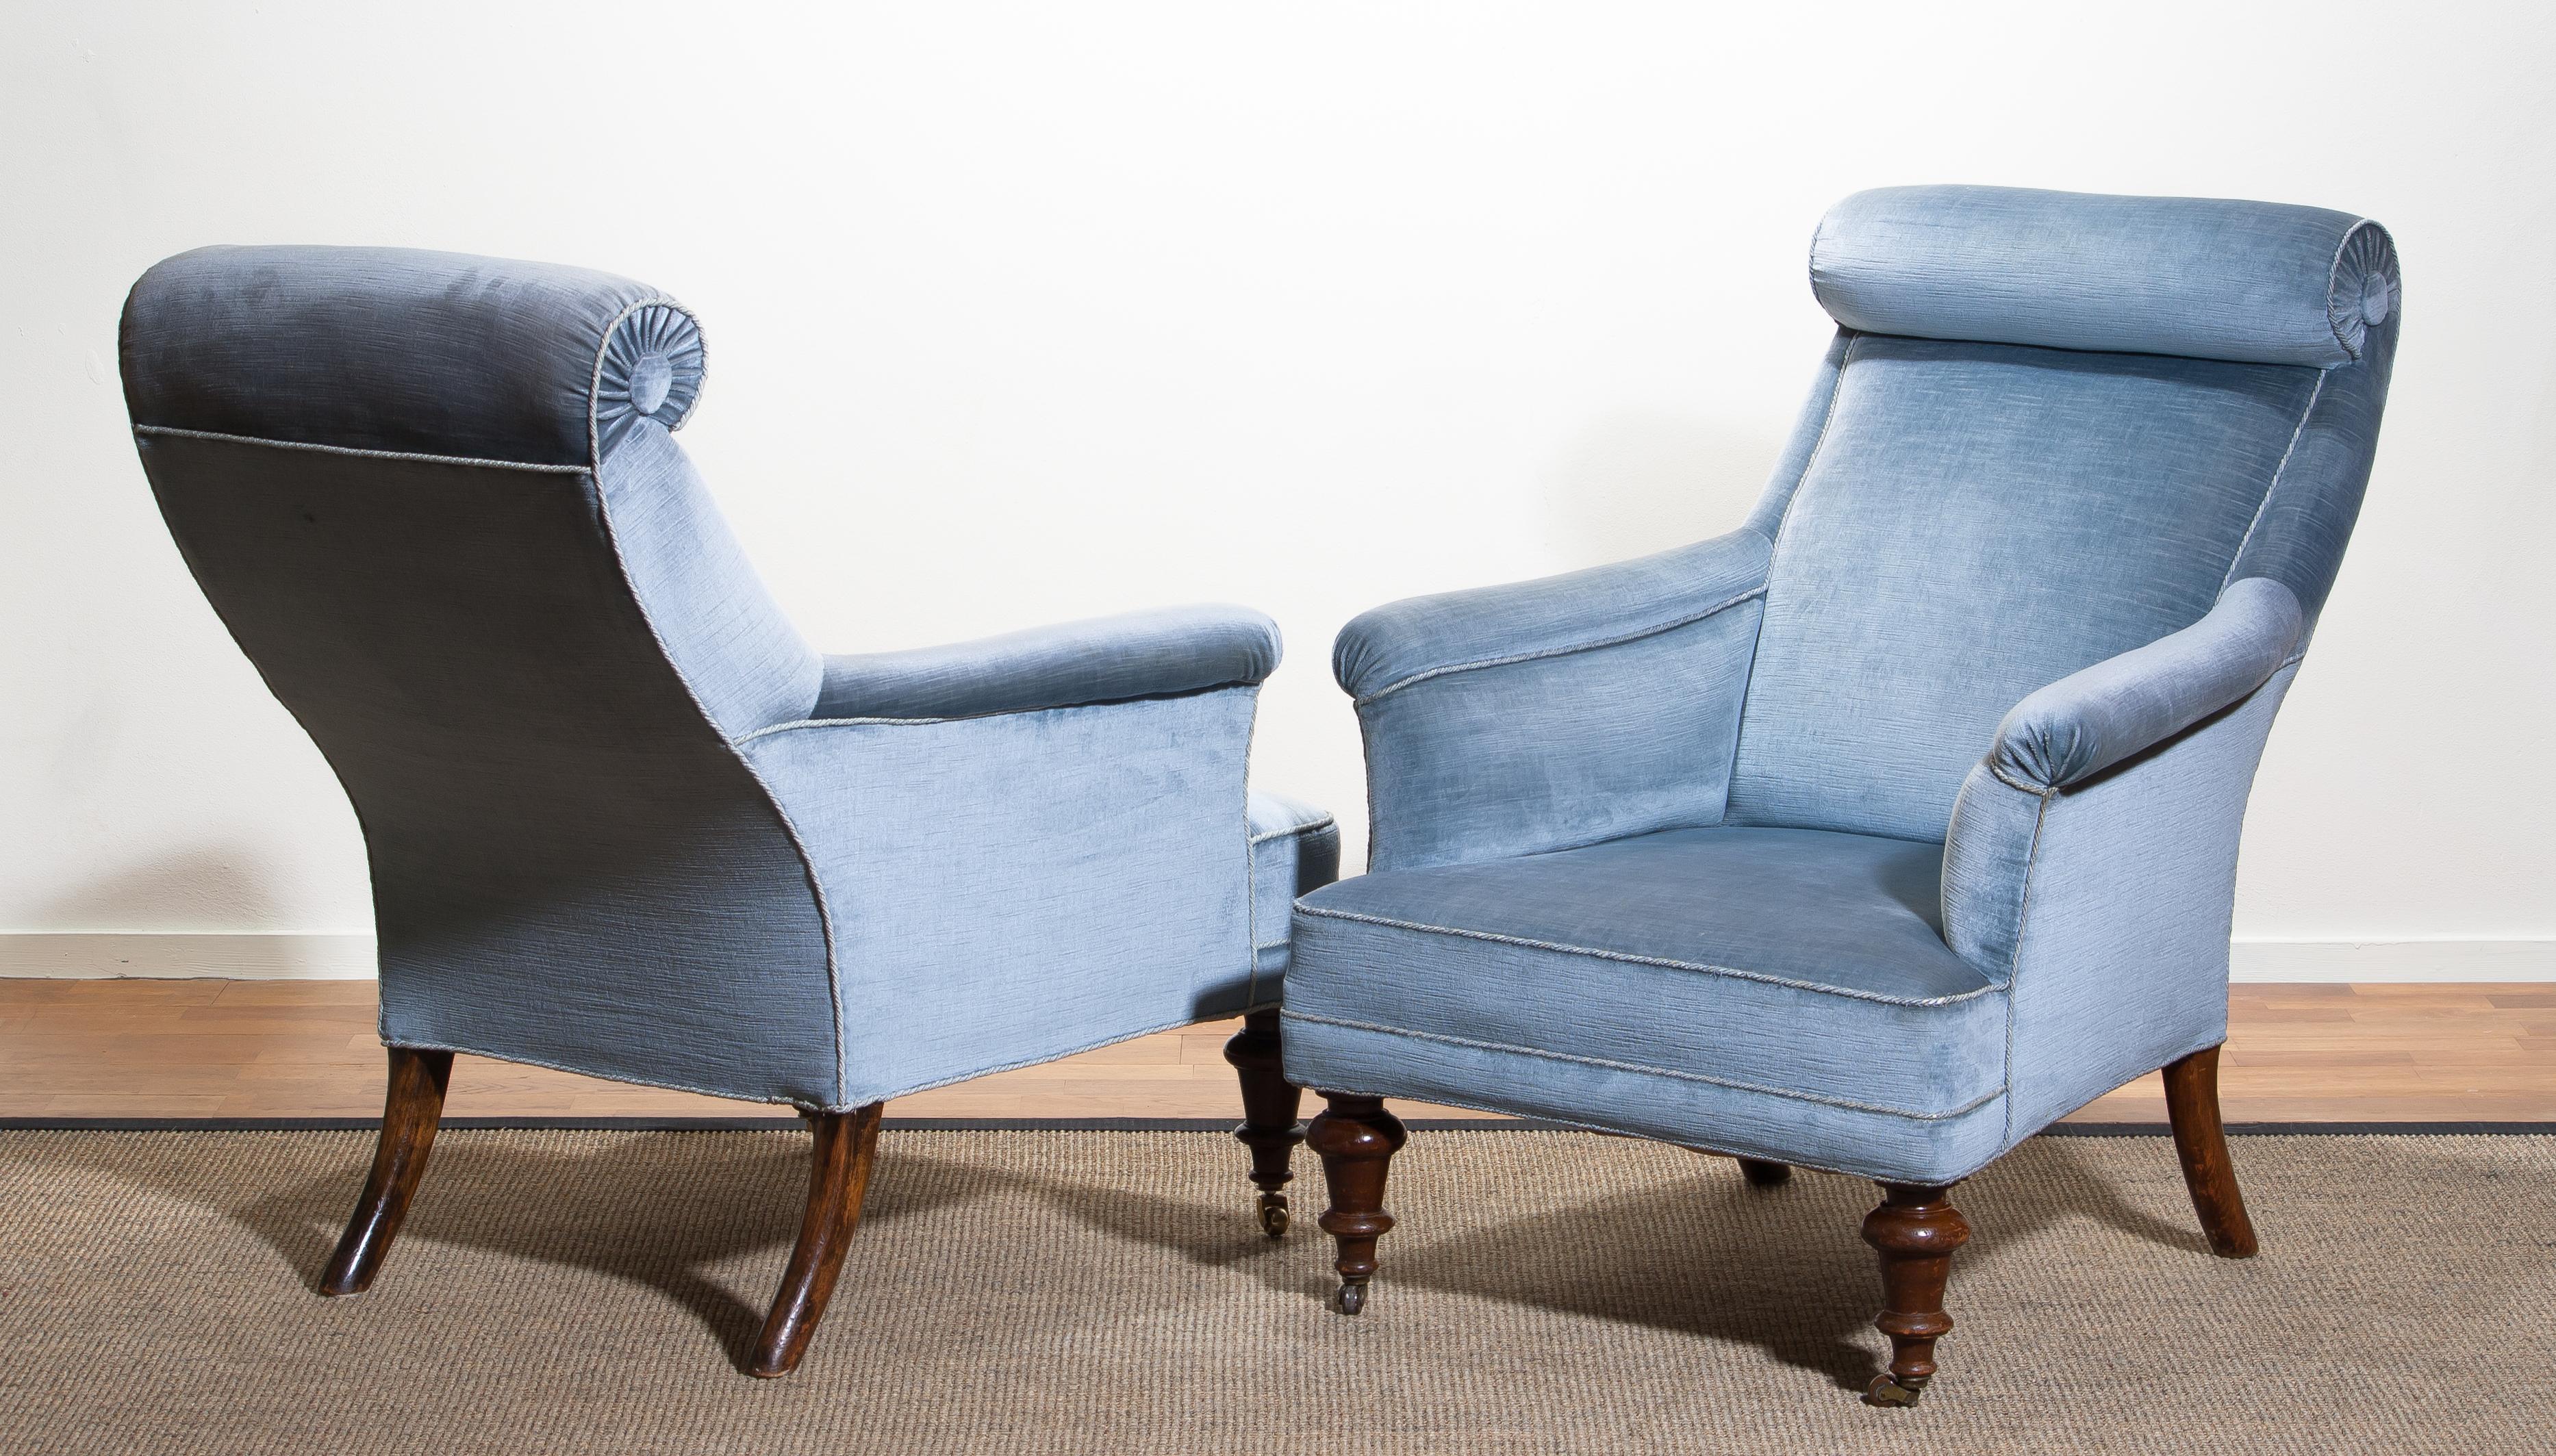 1900s Set of Two Ice Blue Velvet Dorothy Draper Style Bergère Club Lounge Chairs In Good Condition In Silvolde, Gelderland